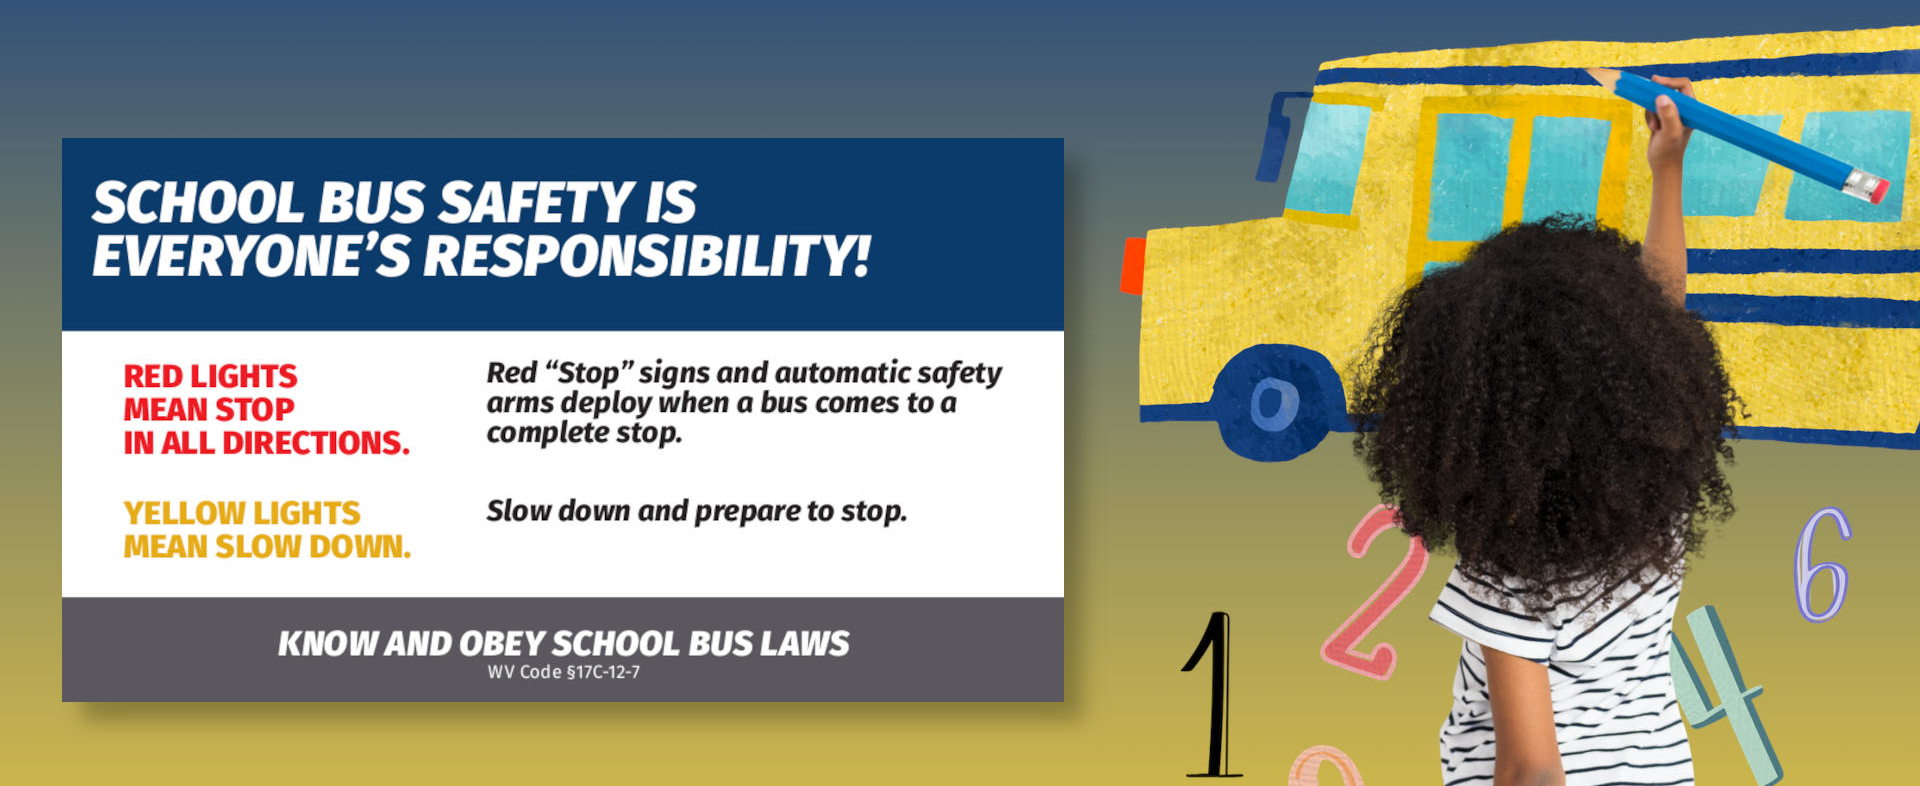 bus safety information